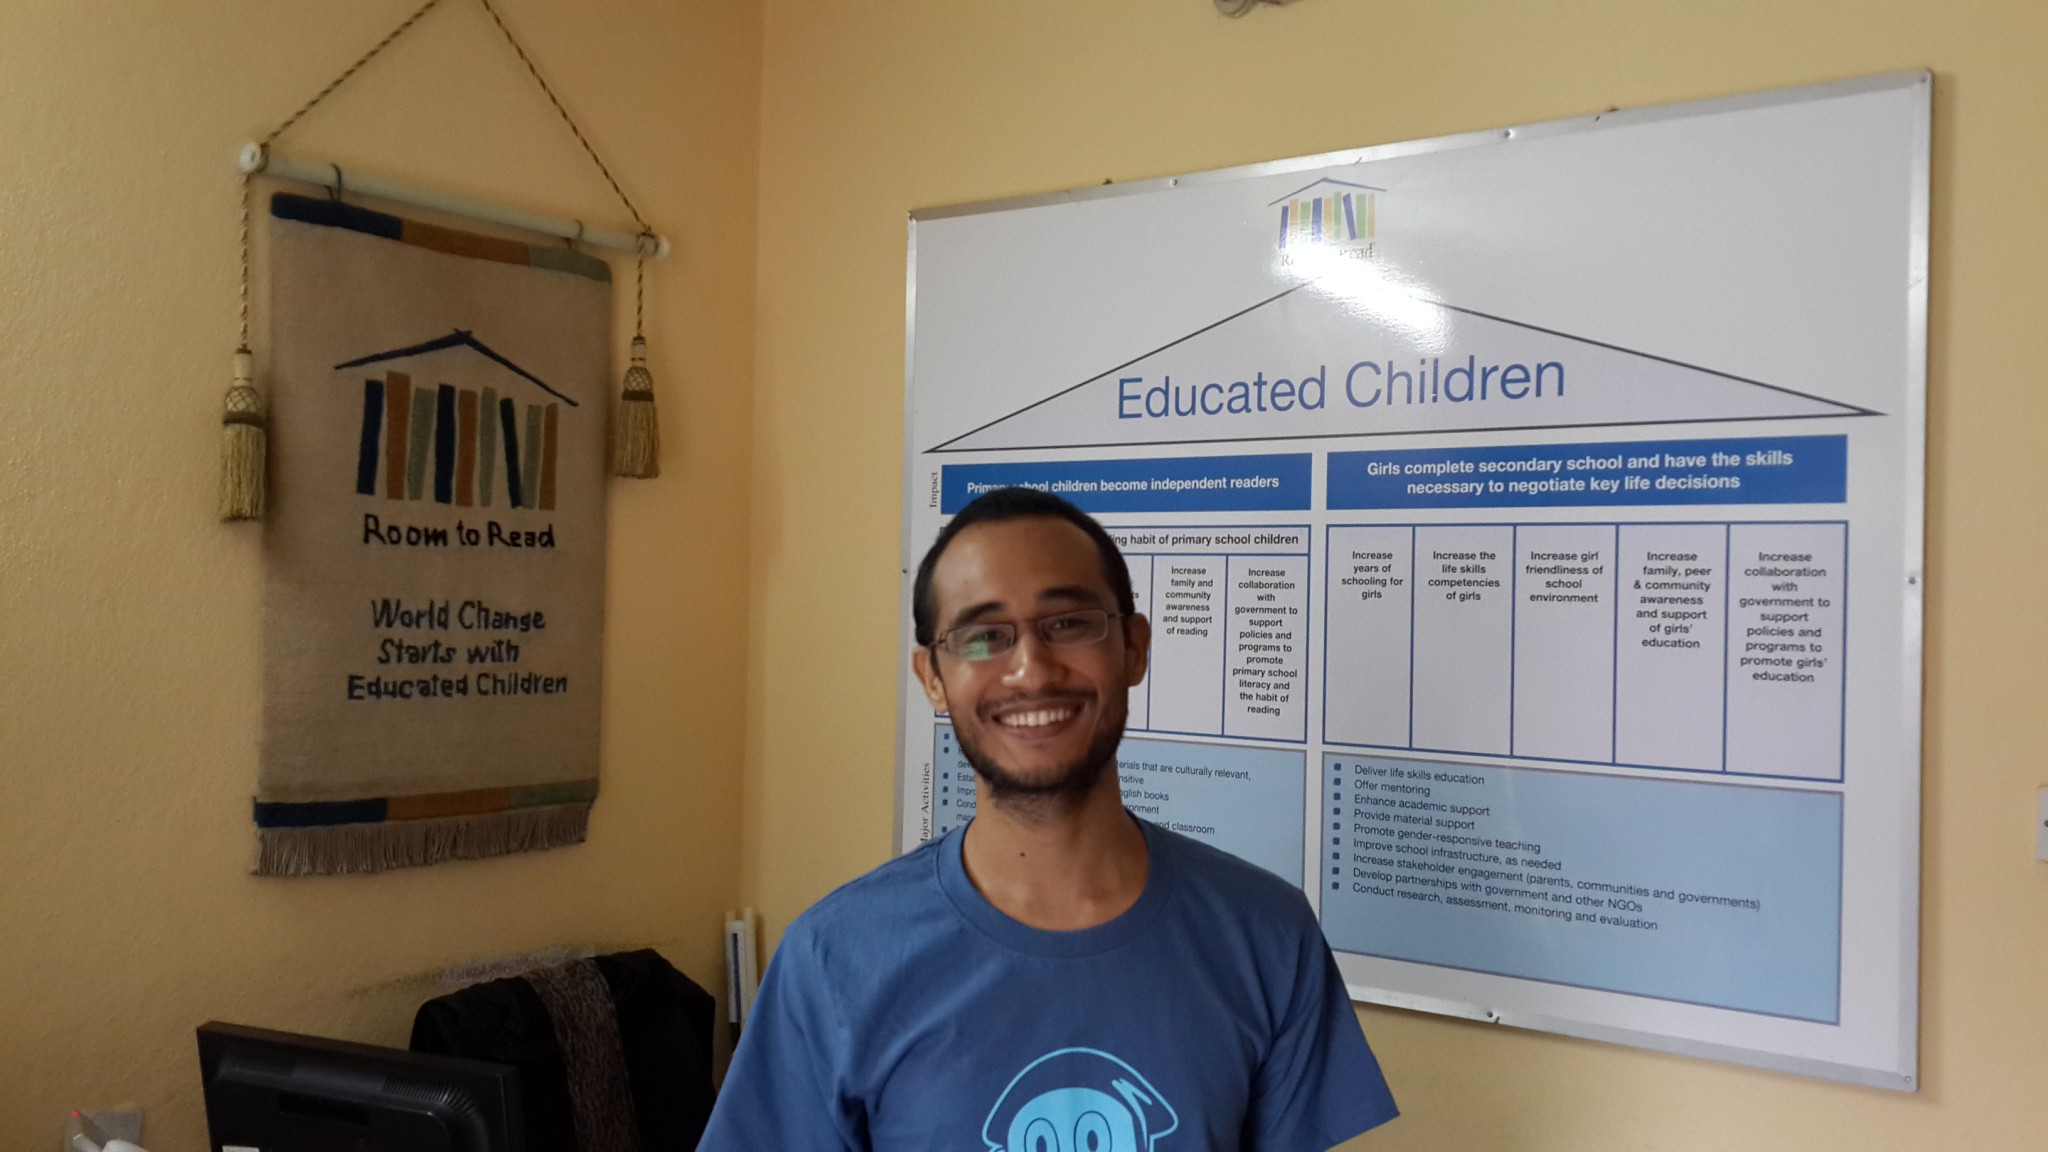 Rishi, who very kindly shared the inspiring work of Room to Read in Nepal